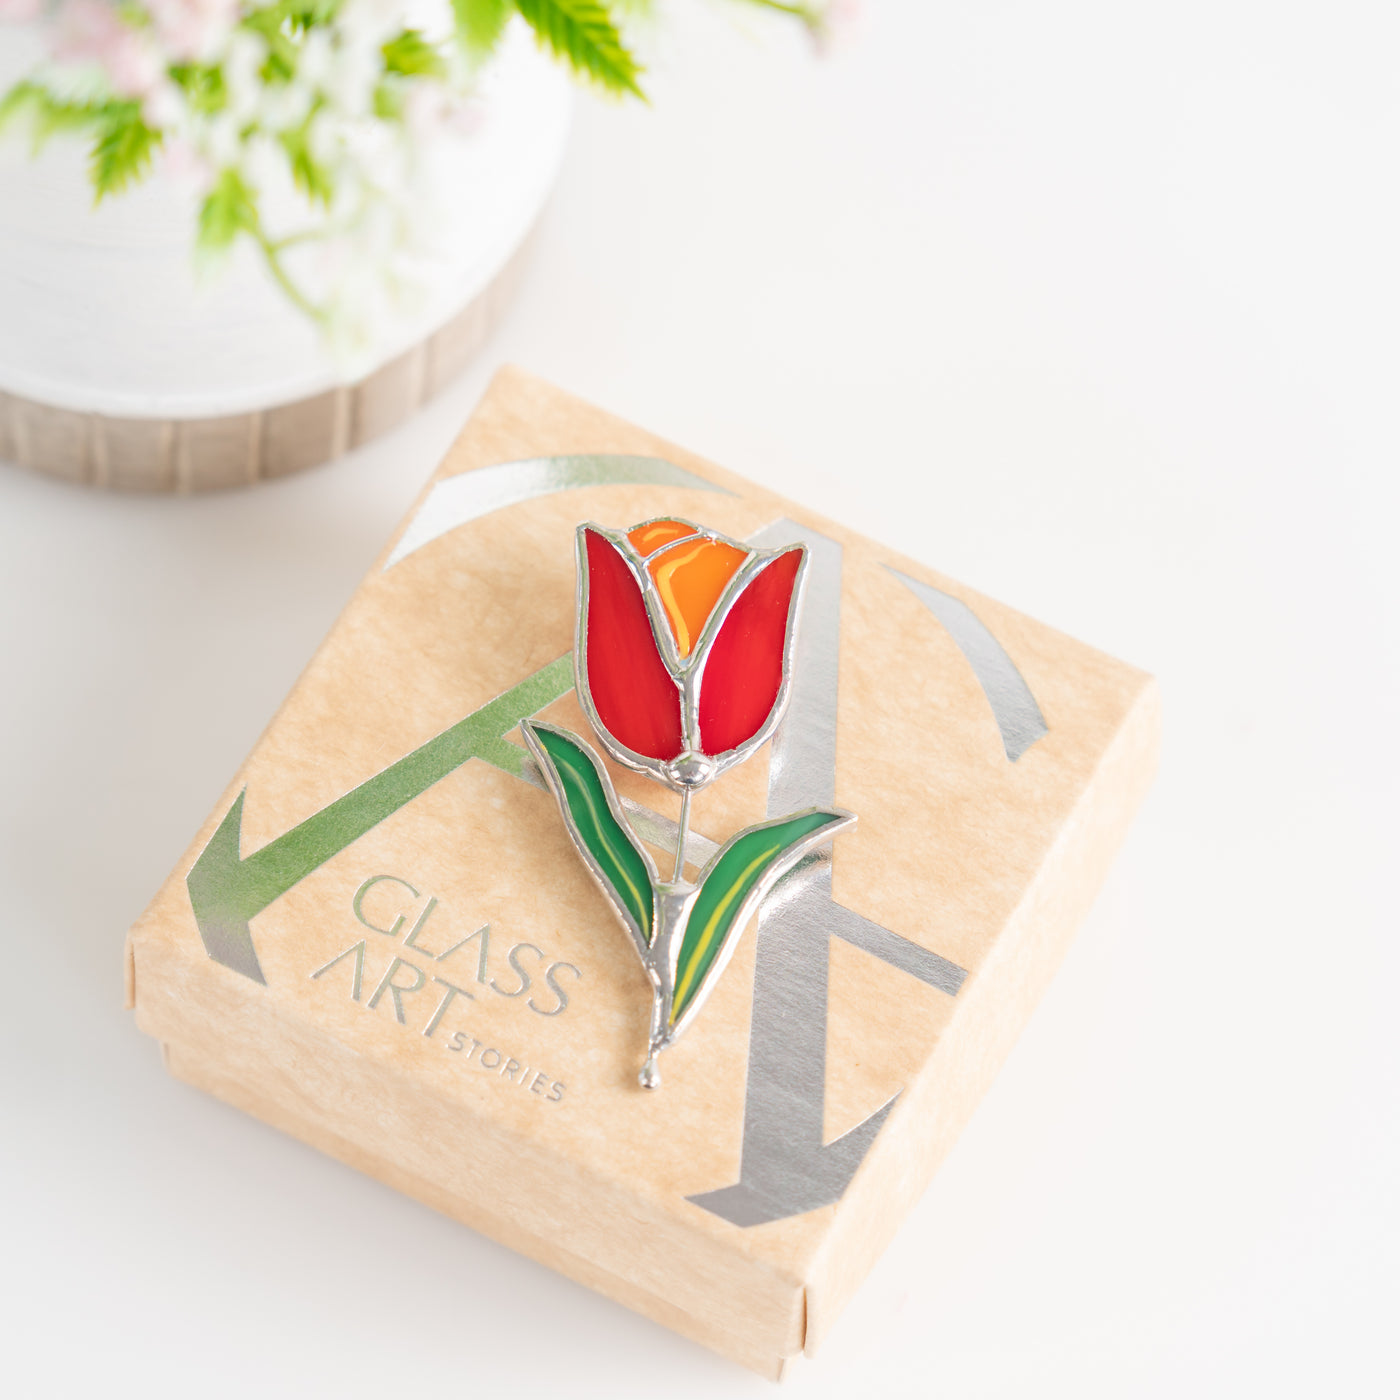 Stained glass red flower pin and a brand box